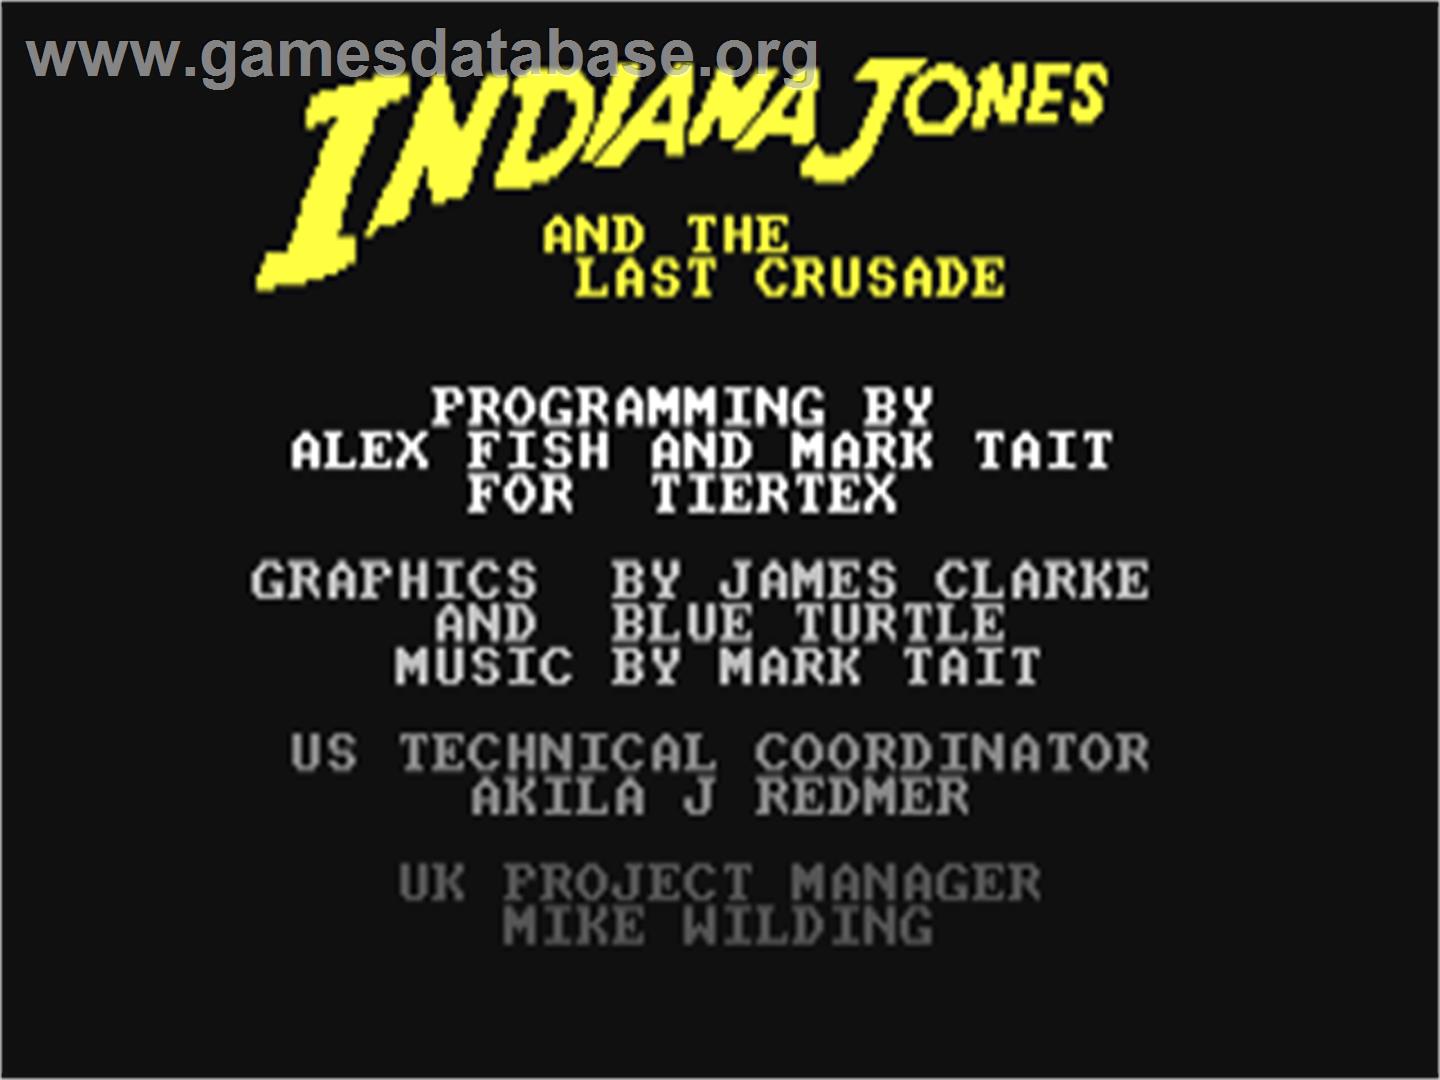 Indiana Jones and the Last Crusade: The Action Game - Commodore 64 - Artwork - Title Screen